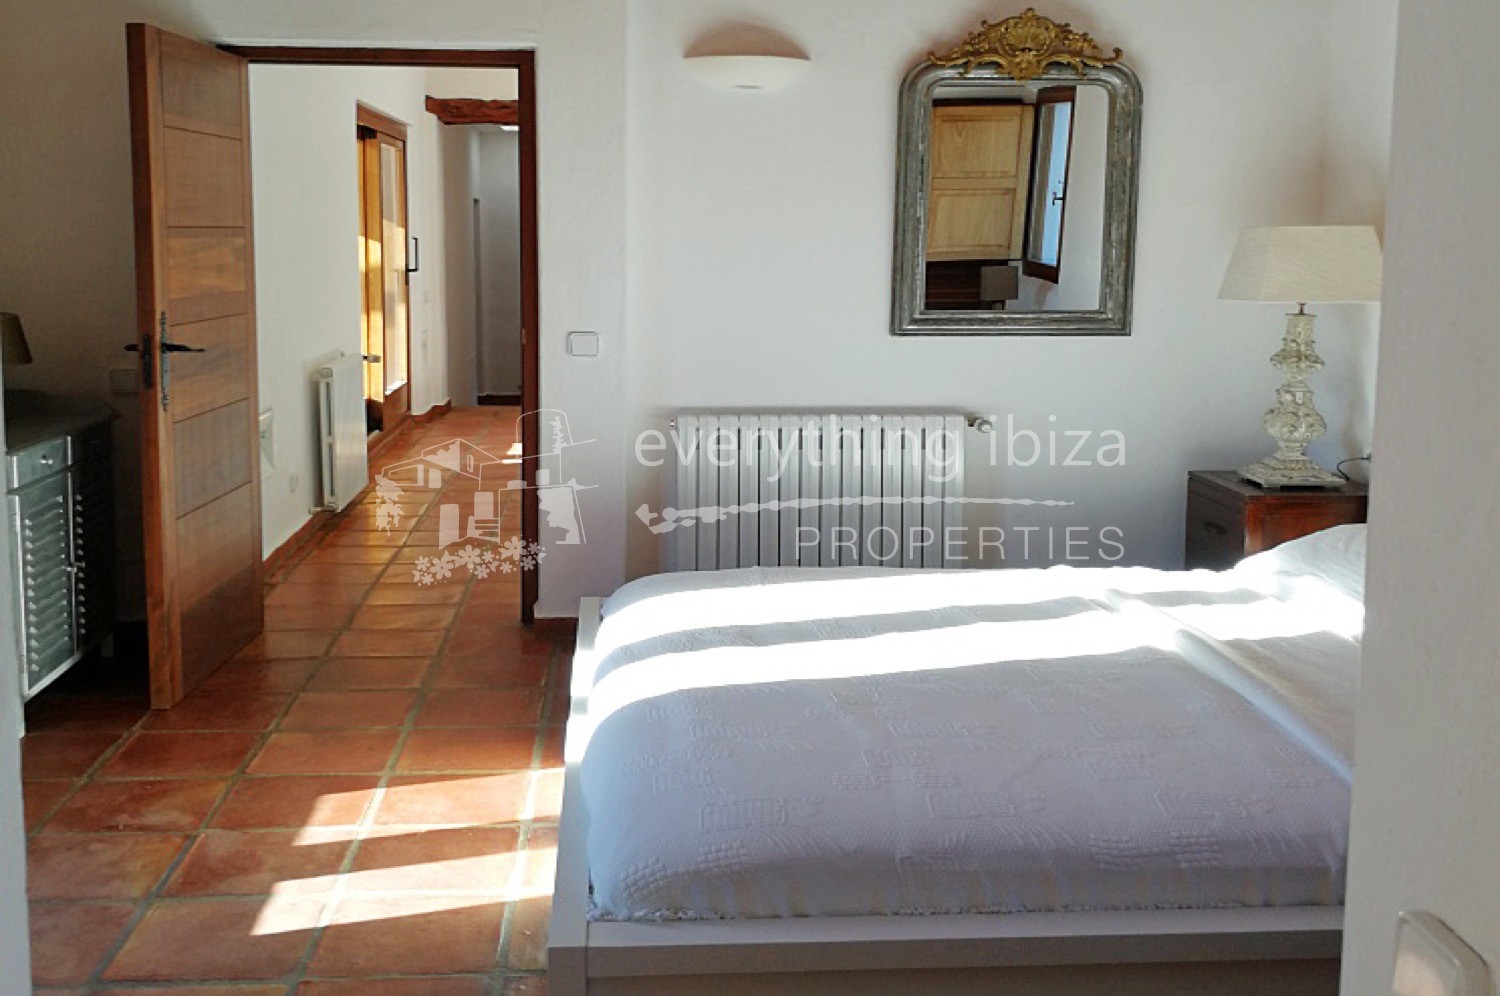 Traditional styled villa for sale by everything ibiza Properties